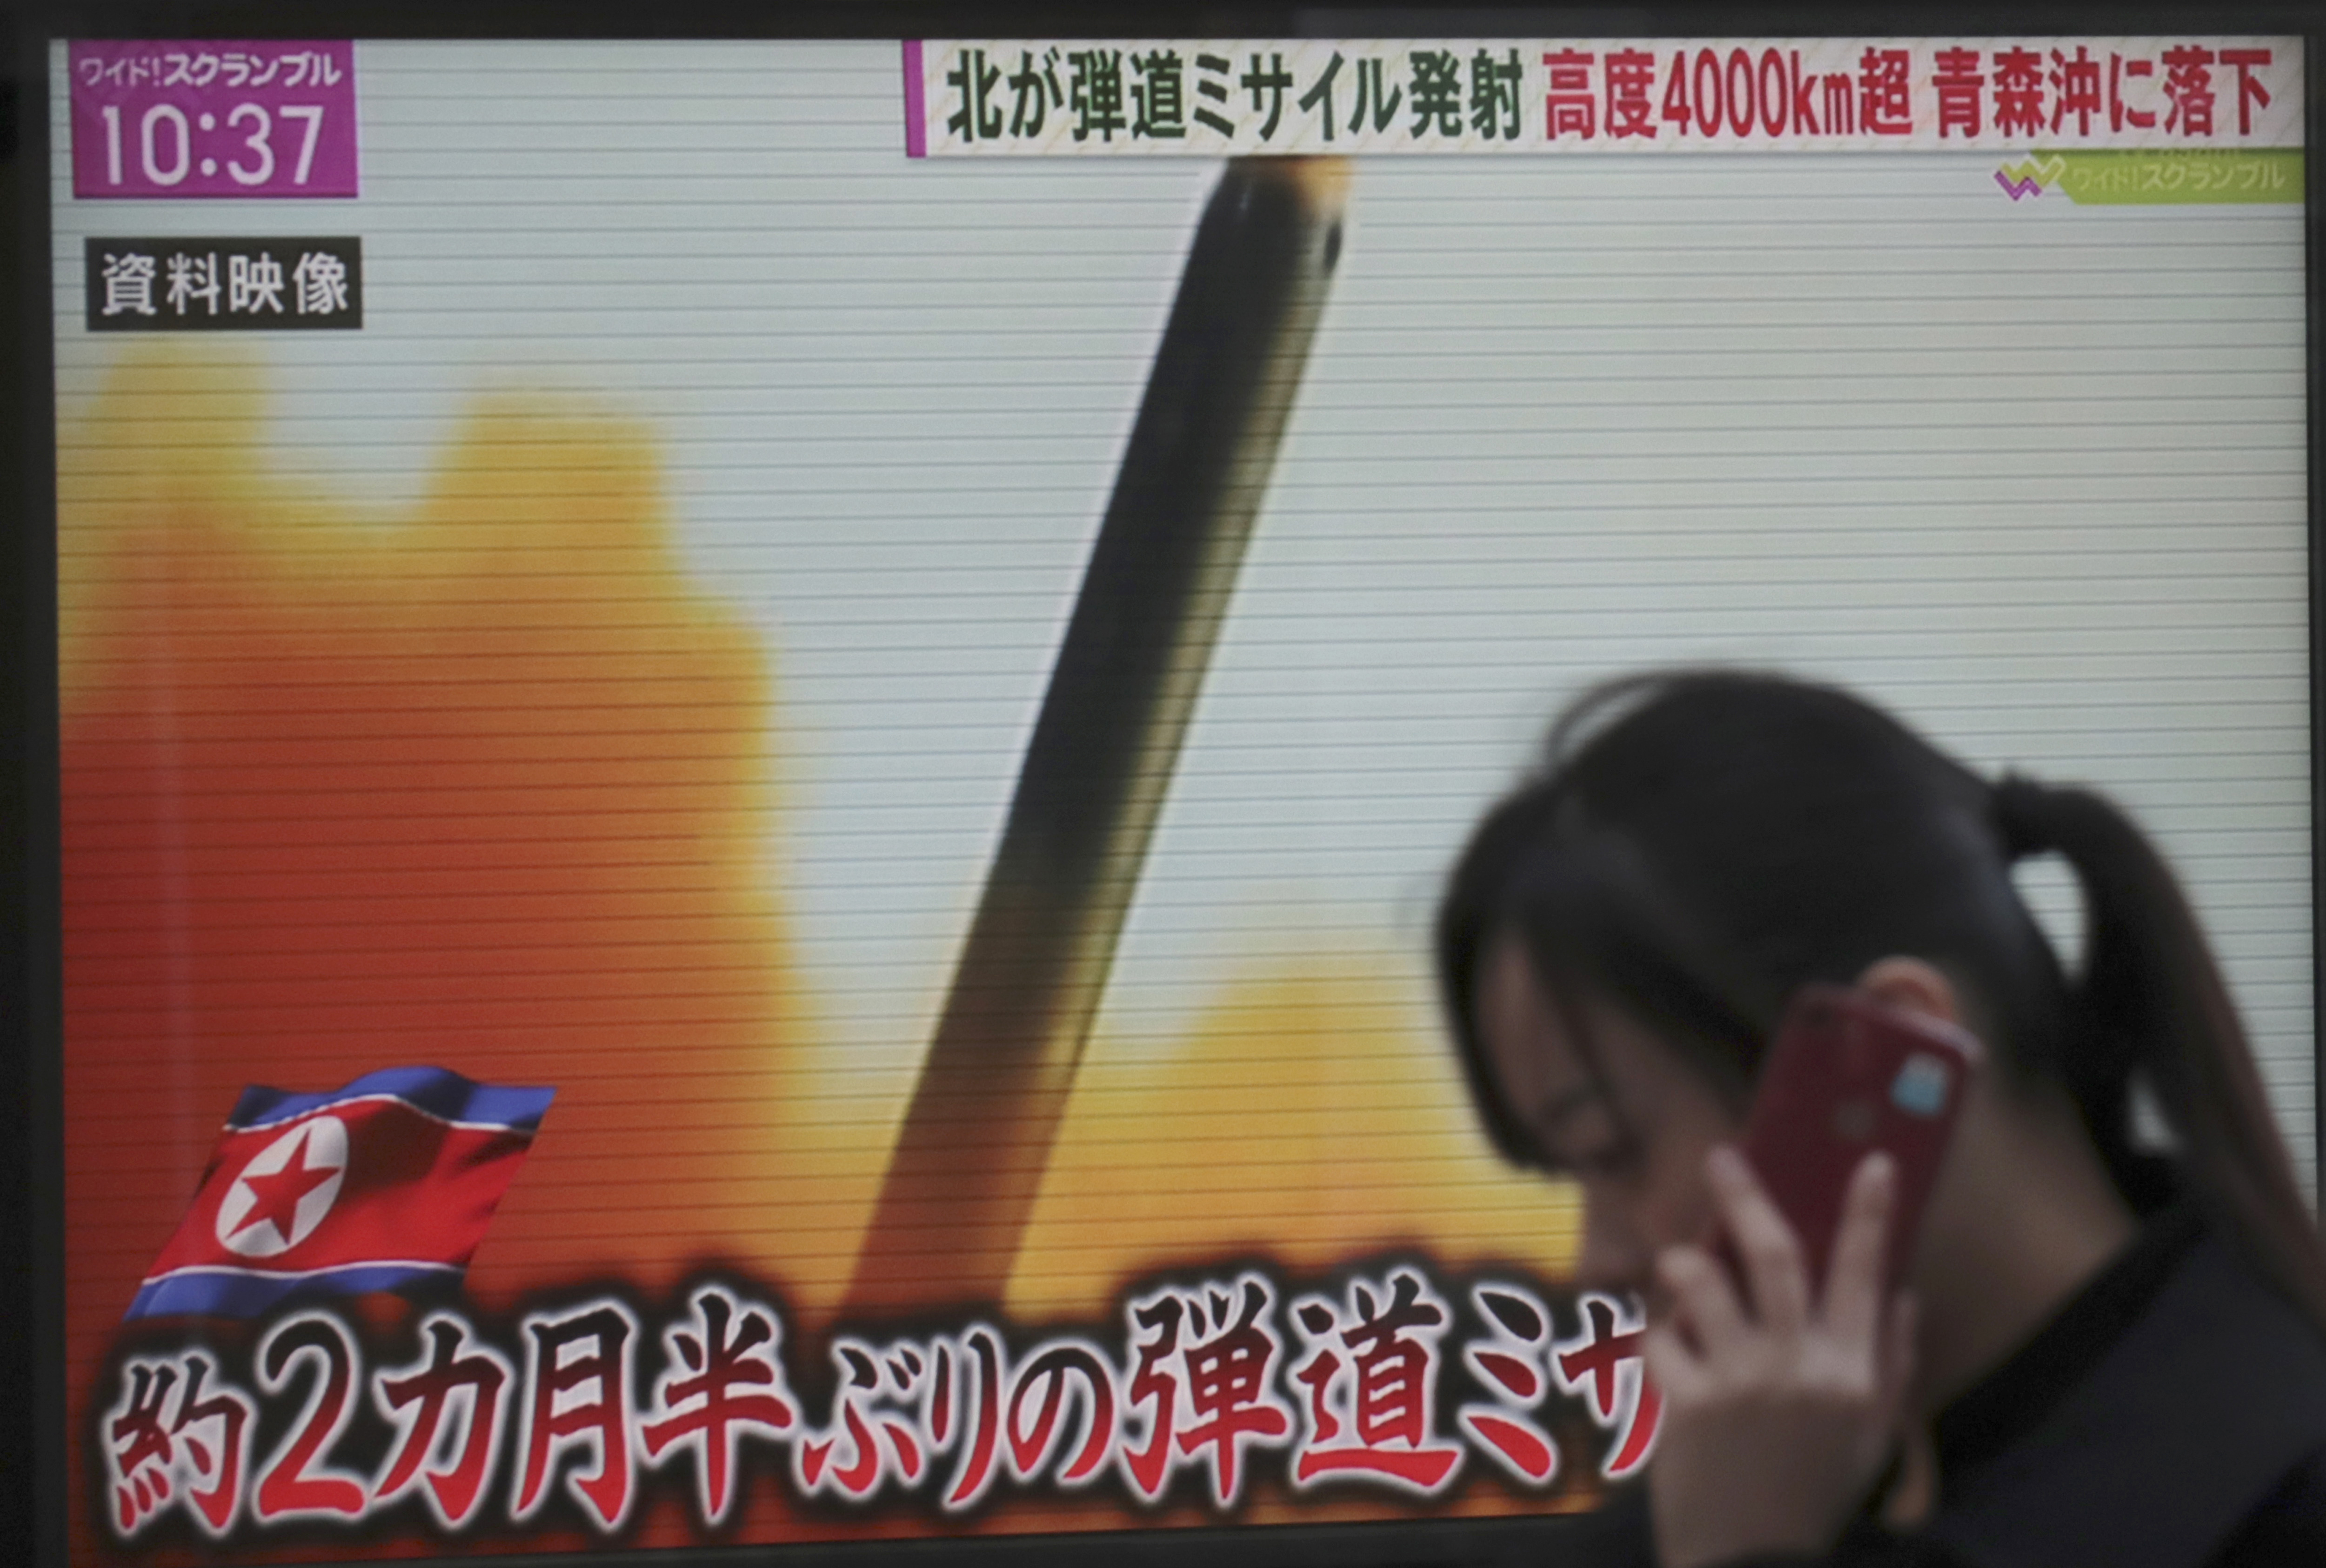 A woman walks past a TV screen broadcasting news of North Korea's missile launch, in Tokyo, Wednesday, Nov. 29, 2017. After 2 ½ months of relative peace, North Korea launched its most powerful weapon yet early Wednesday, a presumed intercontinental ballistic missile that could put Washington and the entire eastern U.S. seaboard within range. The letters at bottom read 